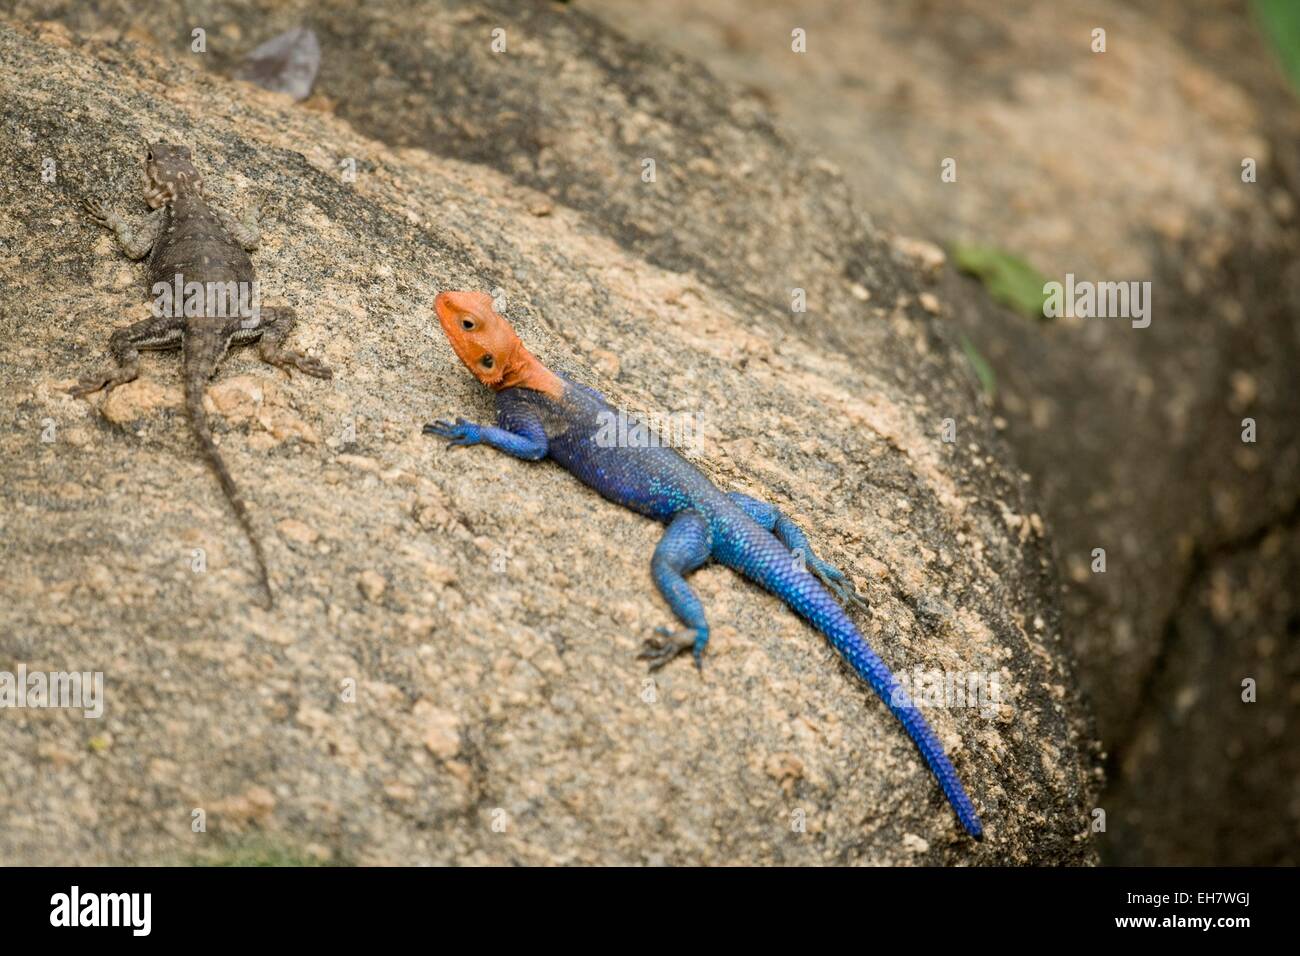 Red-headed Rock agama Stock Photo